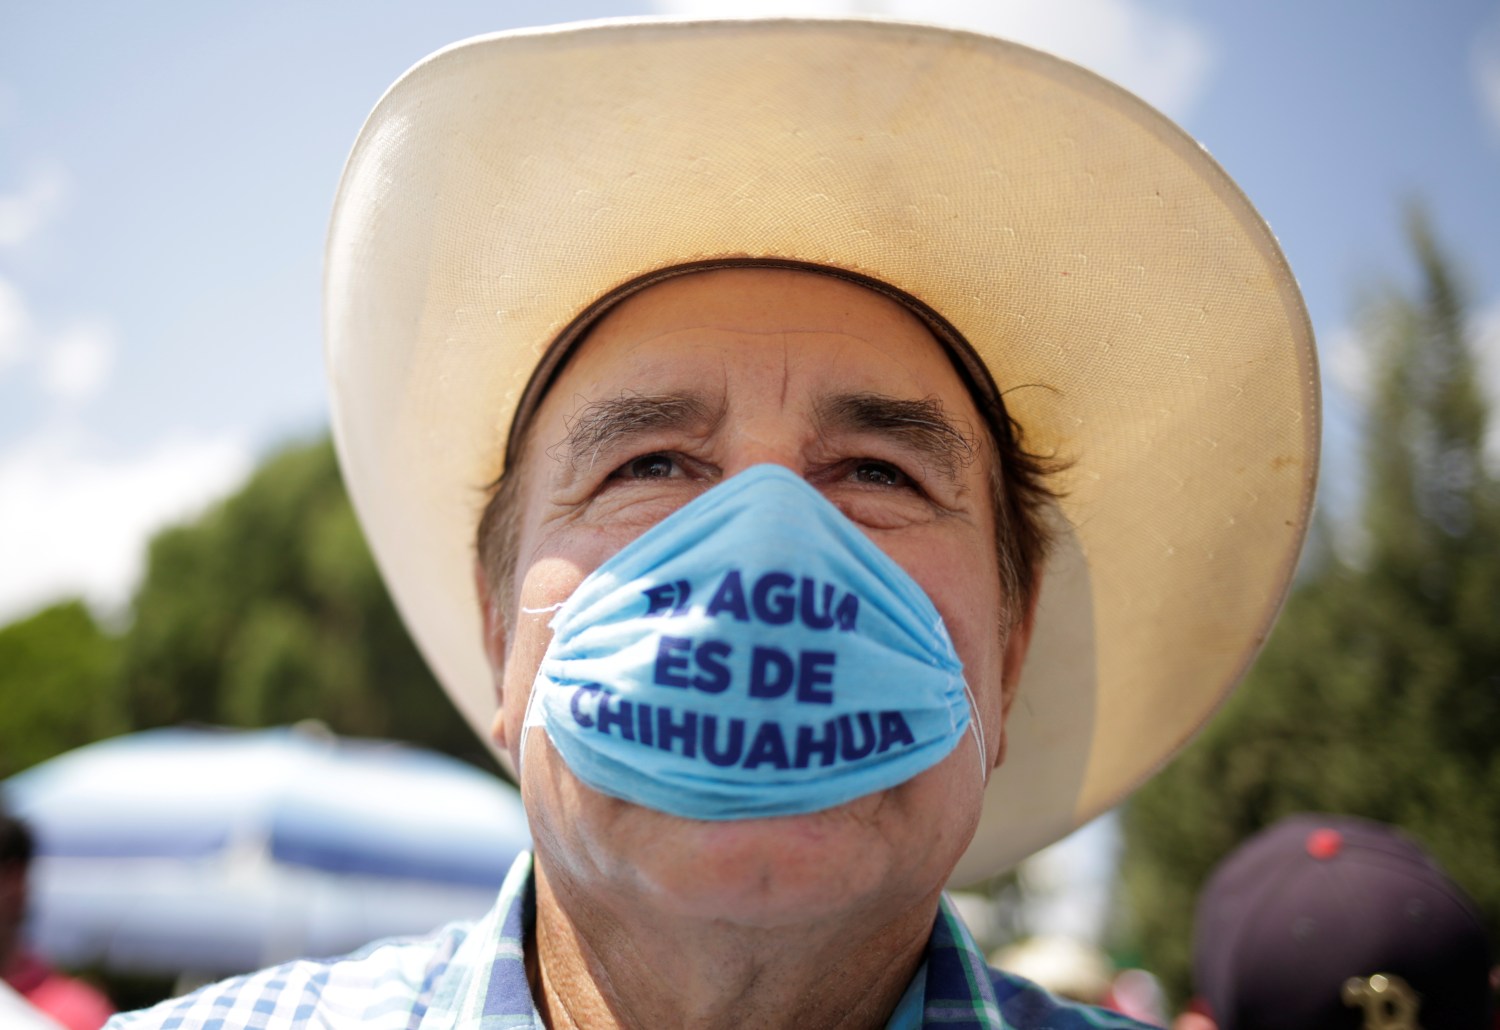 A man wearing a protective face mask attends a protest against the decision of the Mexican government to divert water from La Boquilla dam to the U.S., as part of a 1944 bilateral water treaty between the two countries, in Delicias, Chihuahua state, Mexico September 20, 2020. The writing reads, "Water belongs to Chihuahua". REUTERS/Jose Luis Gonzalez